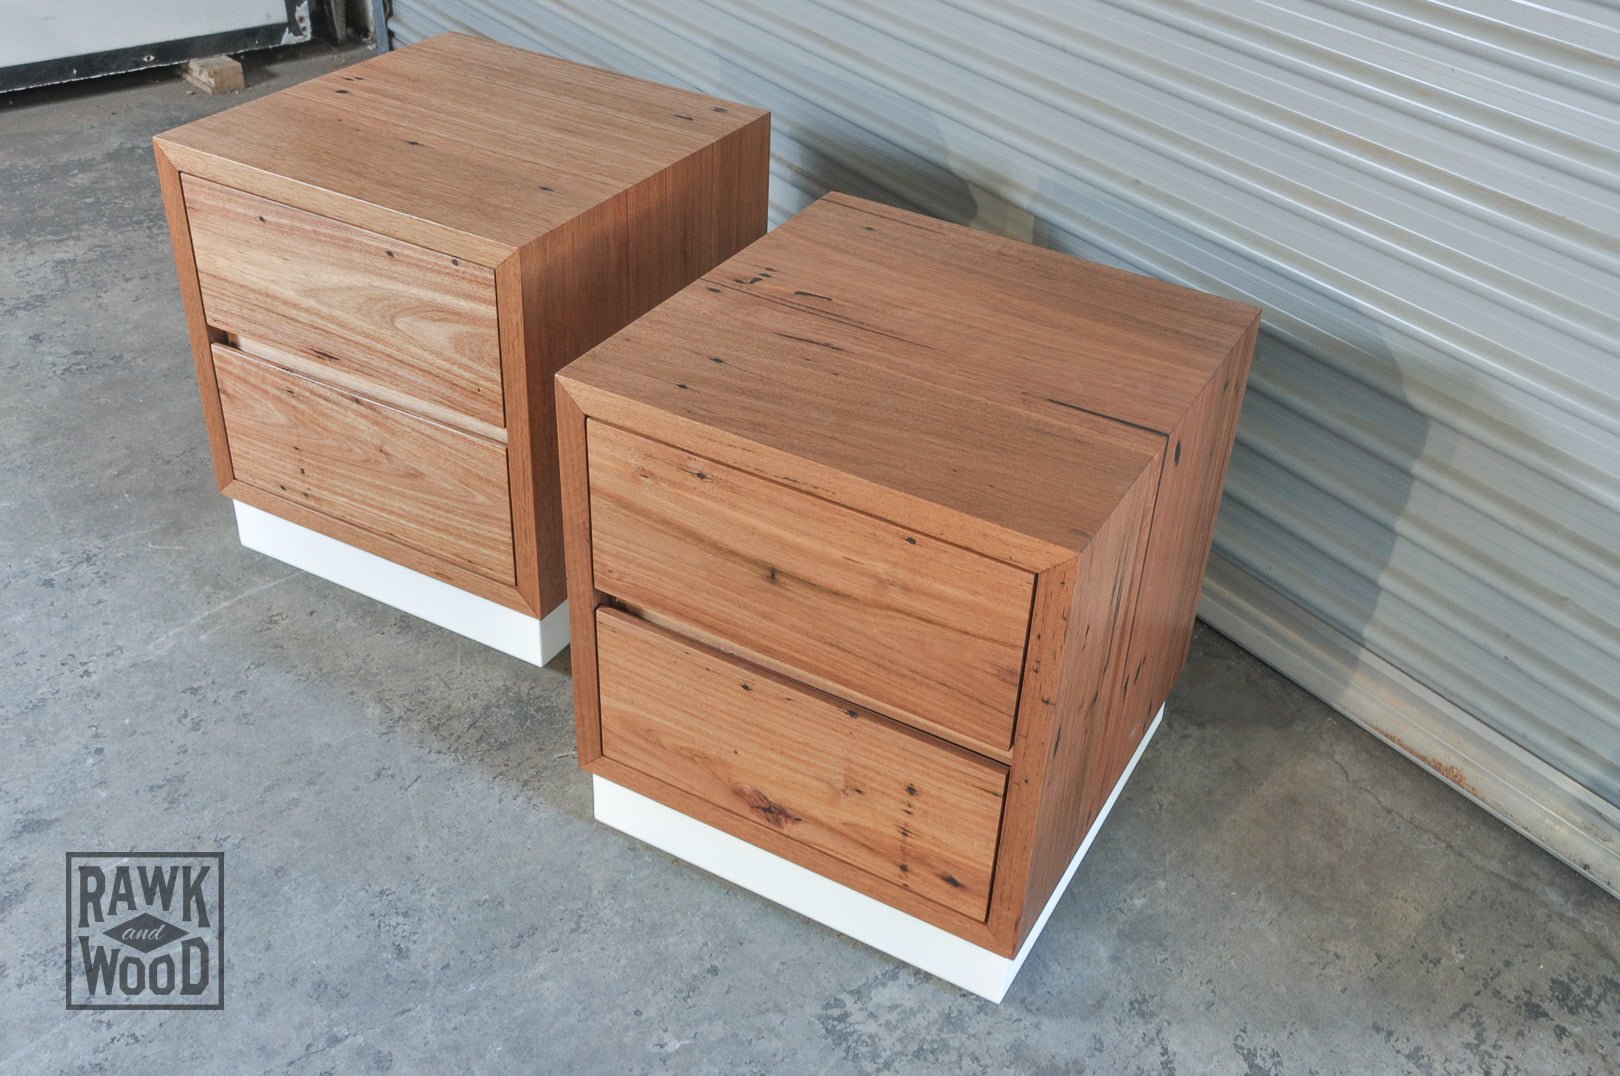 Recycled-Timber-Bedside-Tables, made in Melbourne by Rawk and Wood